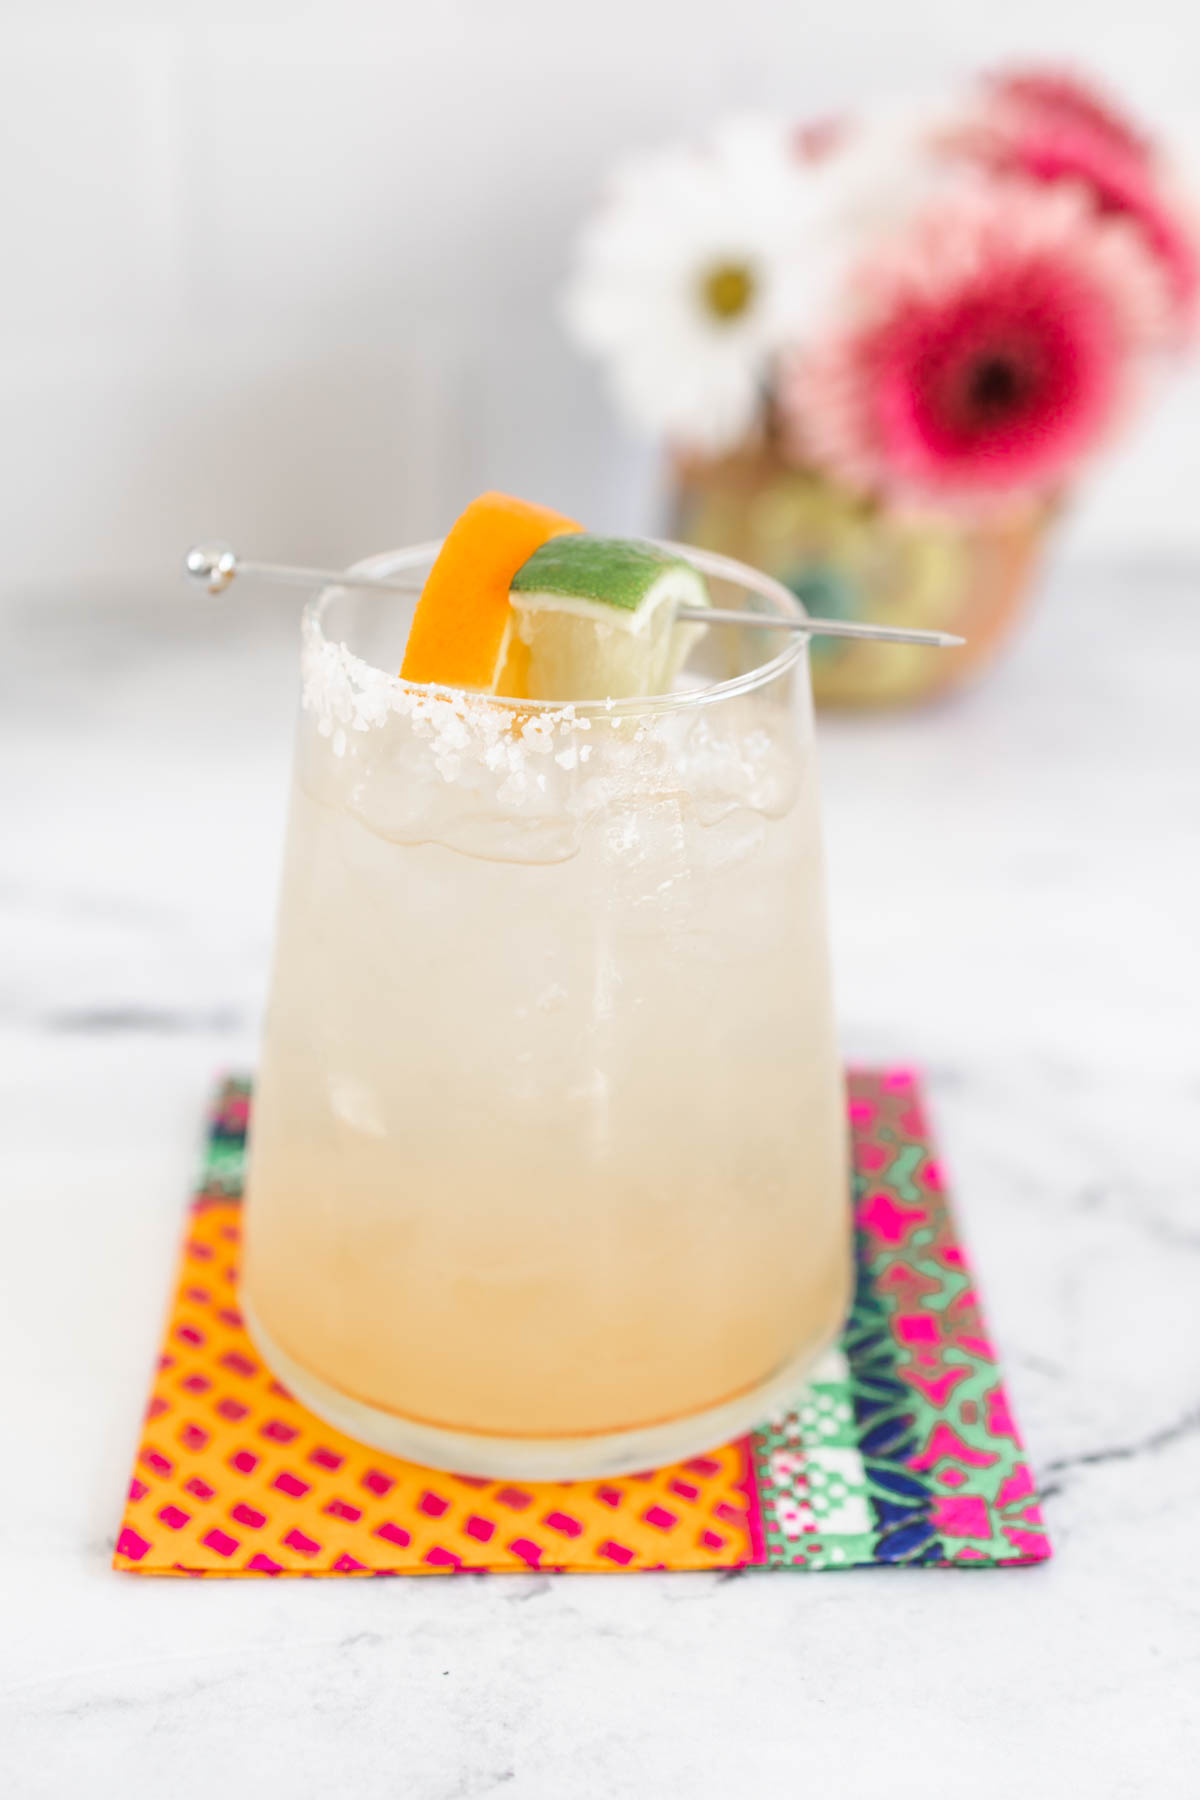 A skinny margarita with orange and lime wedges served in a glass with salt rim.